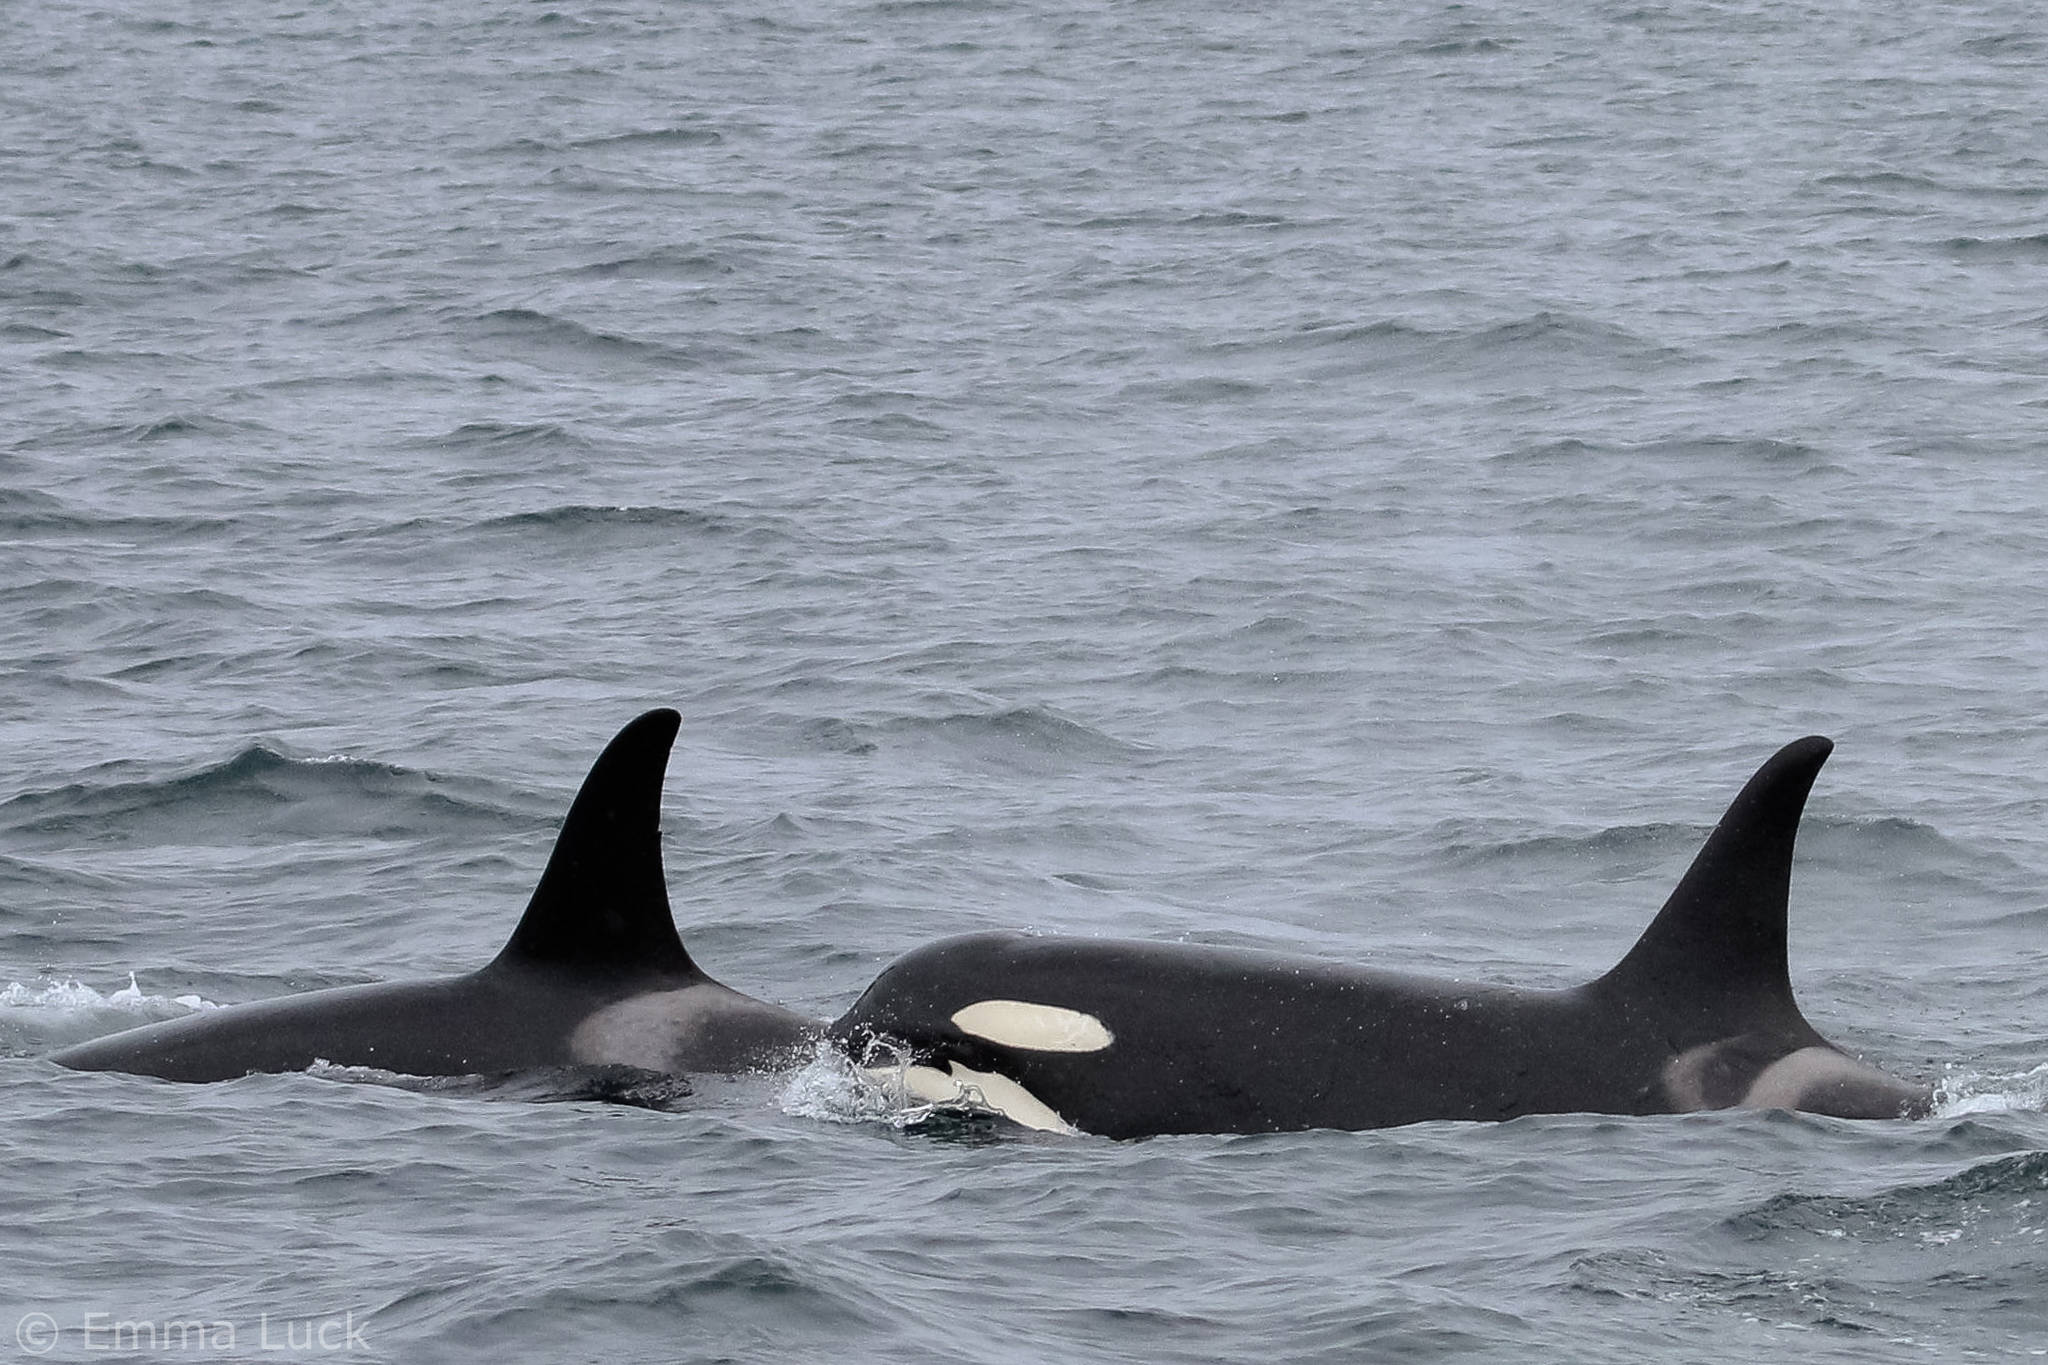 Killer whales from several pods swim in Kachemak Bay on July 9, 2018 near Seldovia, Alaska. About 40 resident whales were seen in the area. Emma Luck, a University of Alaska Southeast marine biology student saw the whales while working as a naturalist for Rainbow Tours. “I’ve personally never seen so many killer whales in one spot,” Luck said. “It was a sight to behold.” (Photo by Emma Luck)